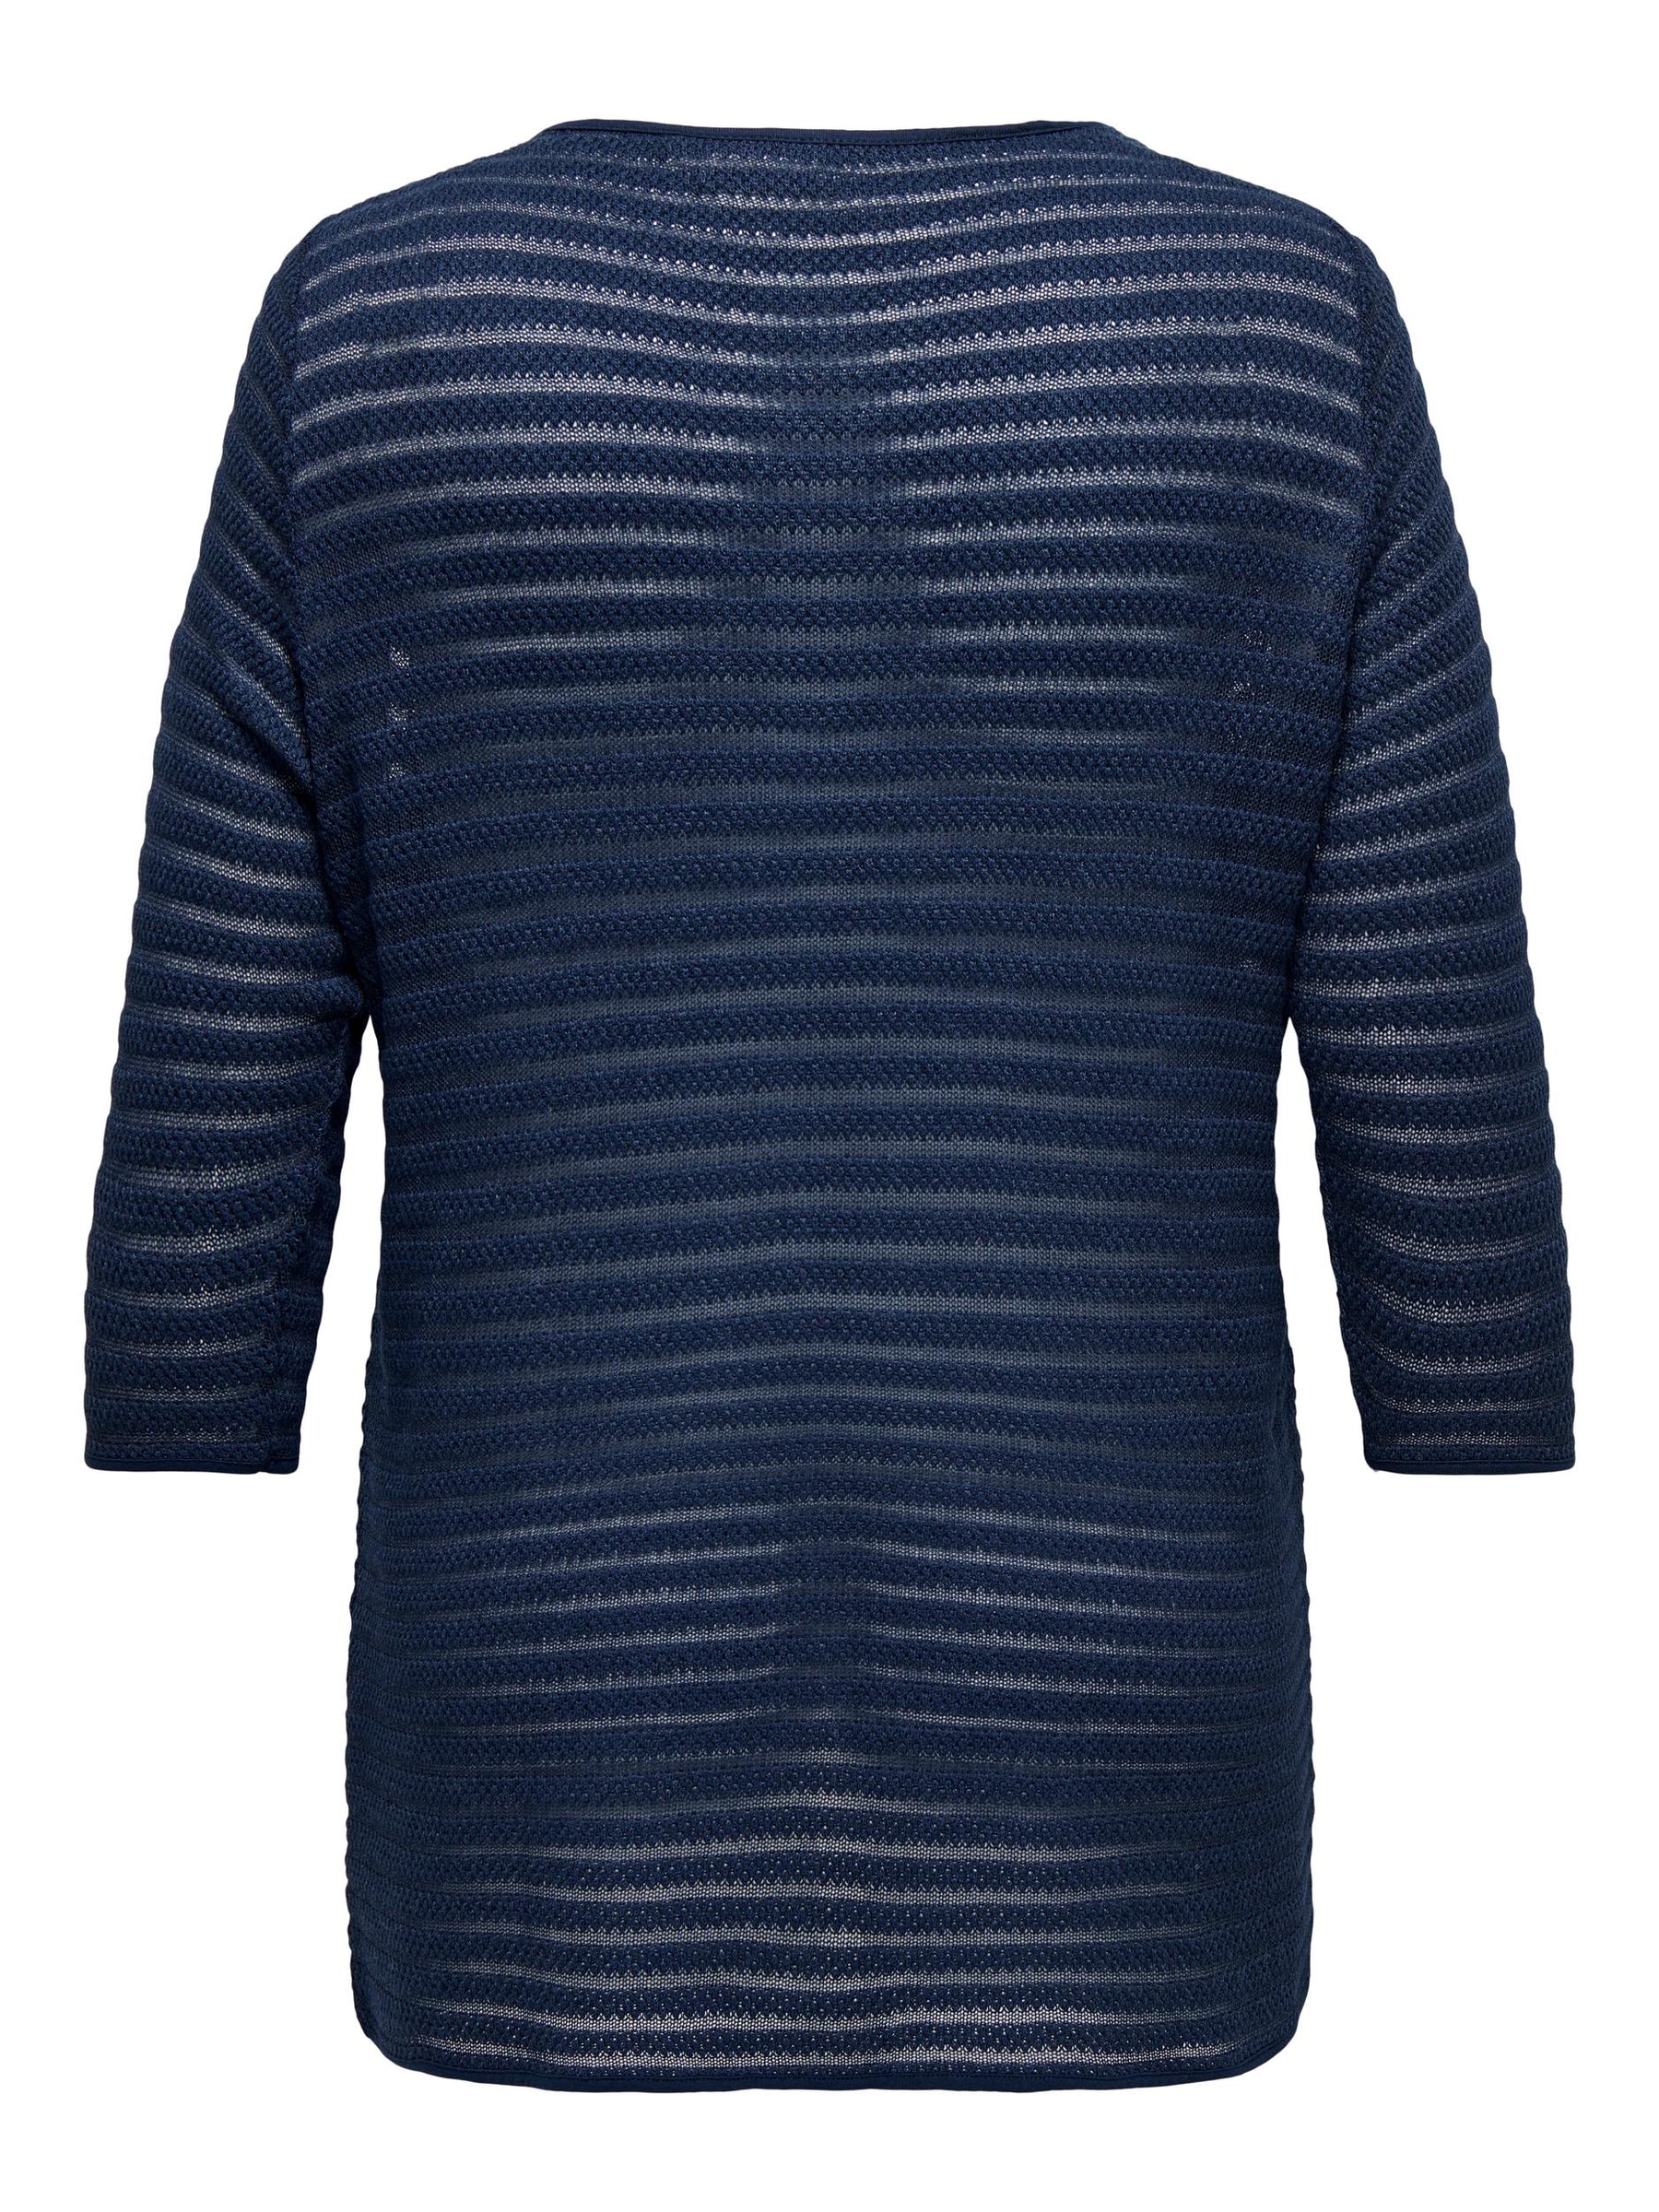 Only Carmakoma 3/4 Cardigan in Navy